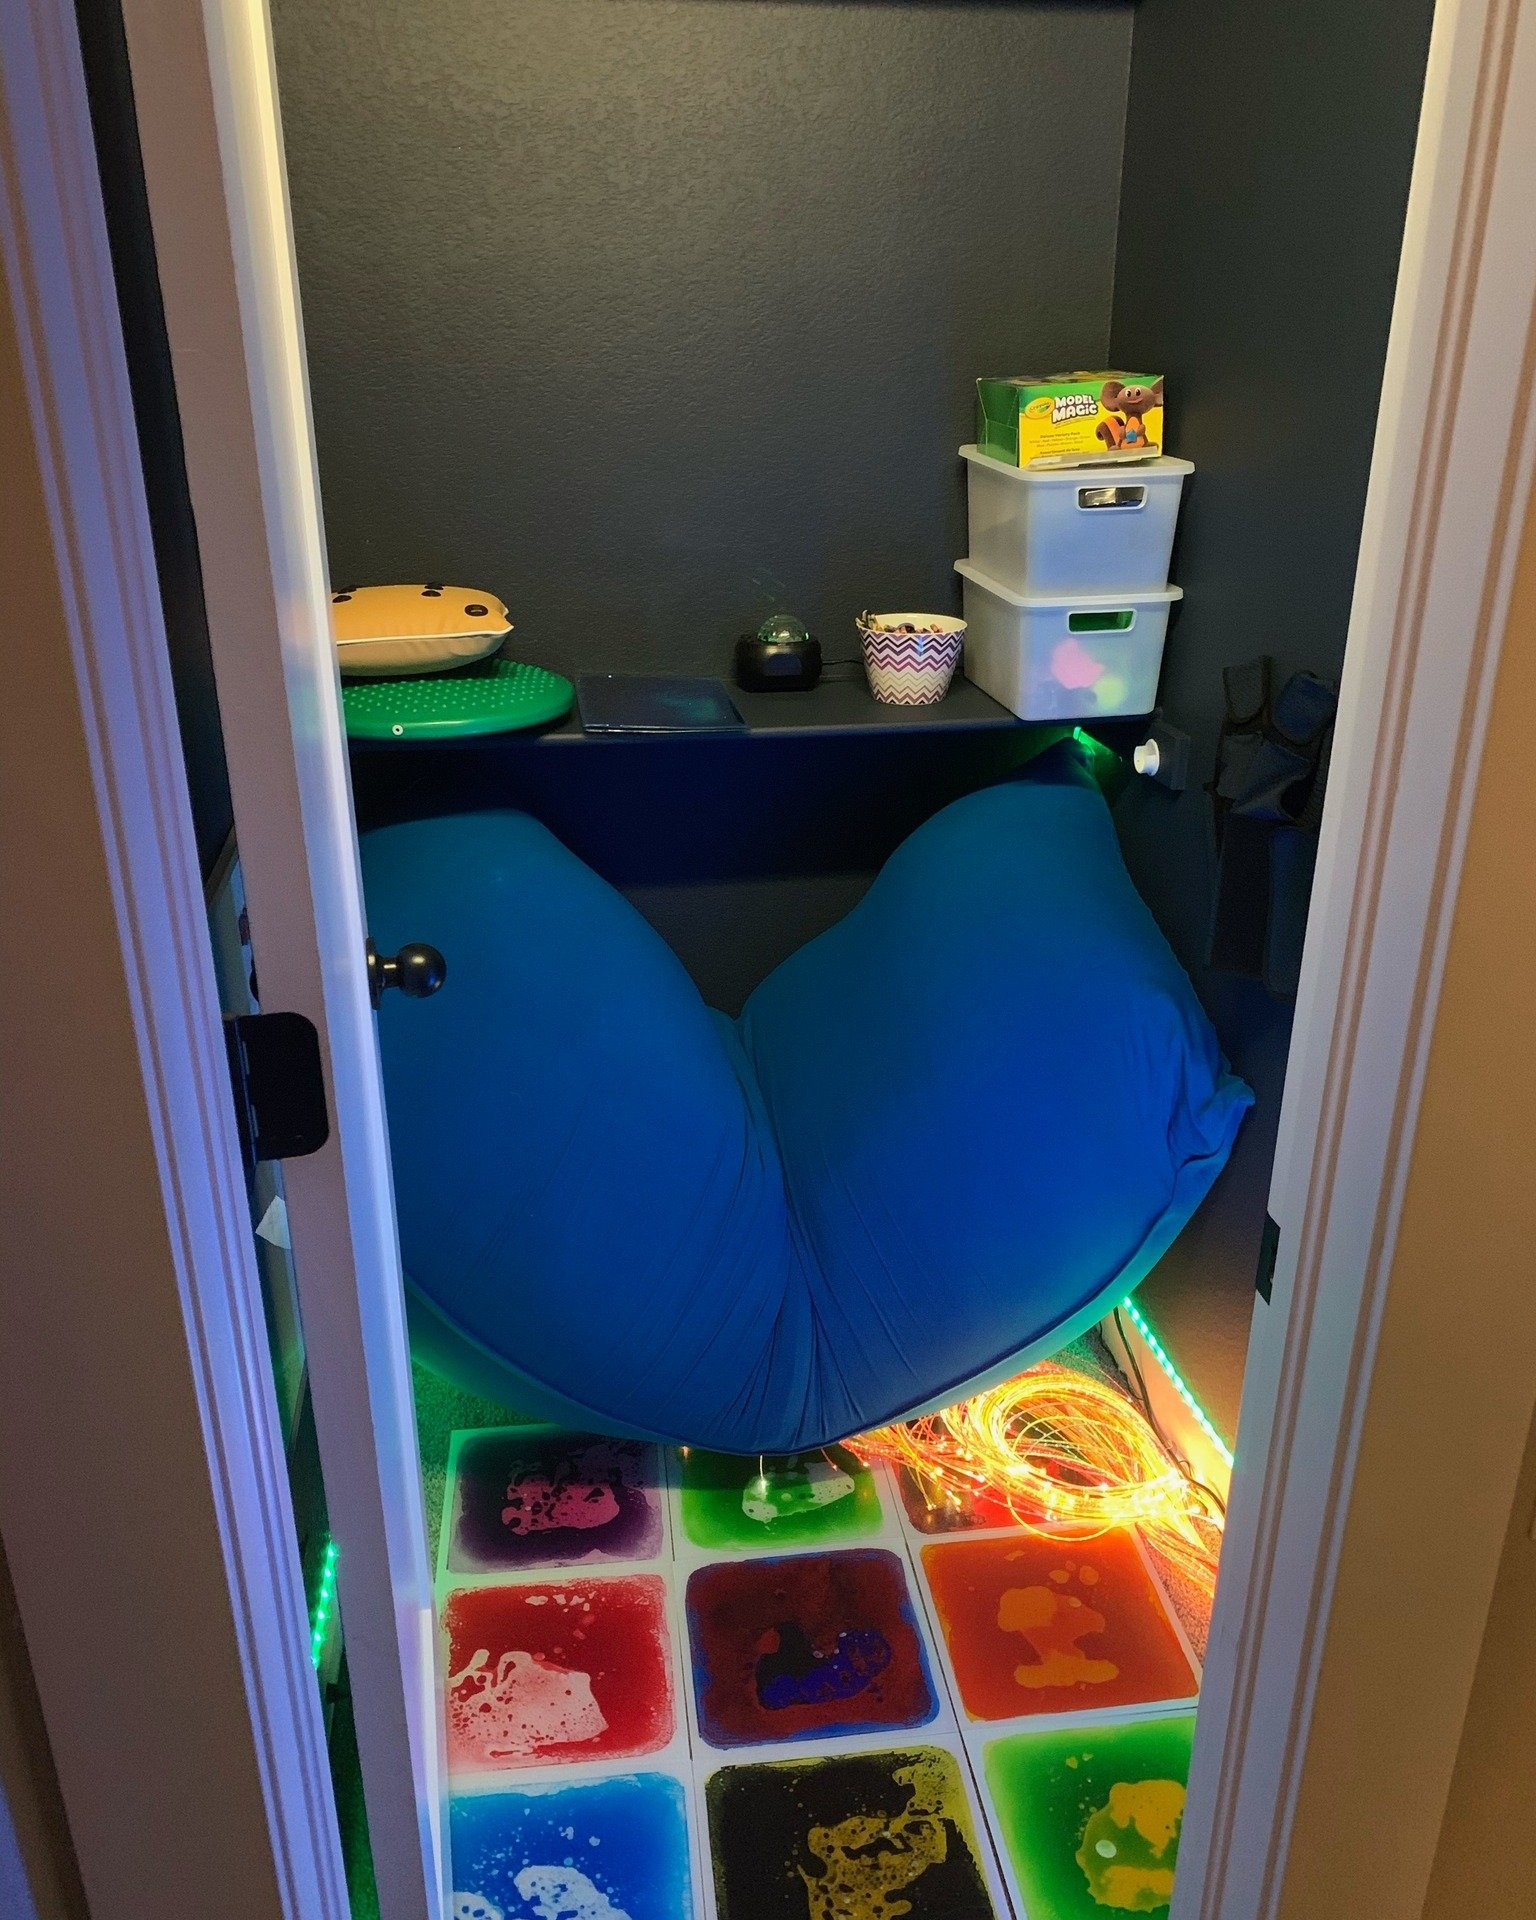 Who says closets are just for clothes? 

This closet was transformed into a sensory sanctuary with painted walls, a cozy bean bag chair, sensory tiles, and more - perfect for sensory regulation and relaxation. 

At SENSE-ational Spaces, we specialize